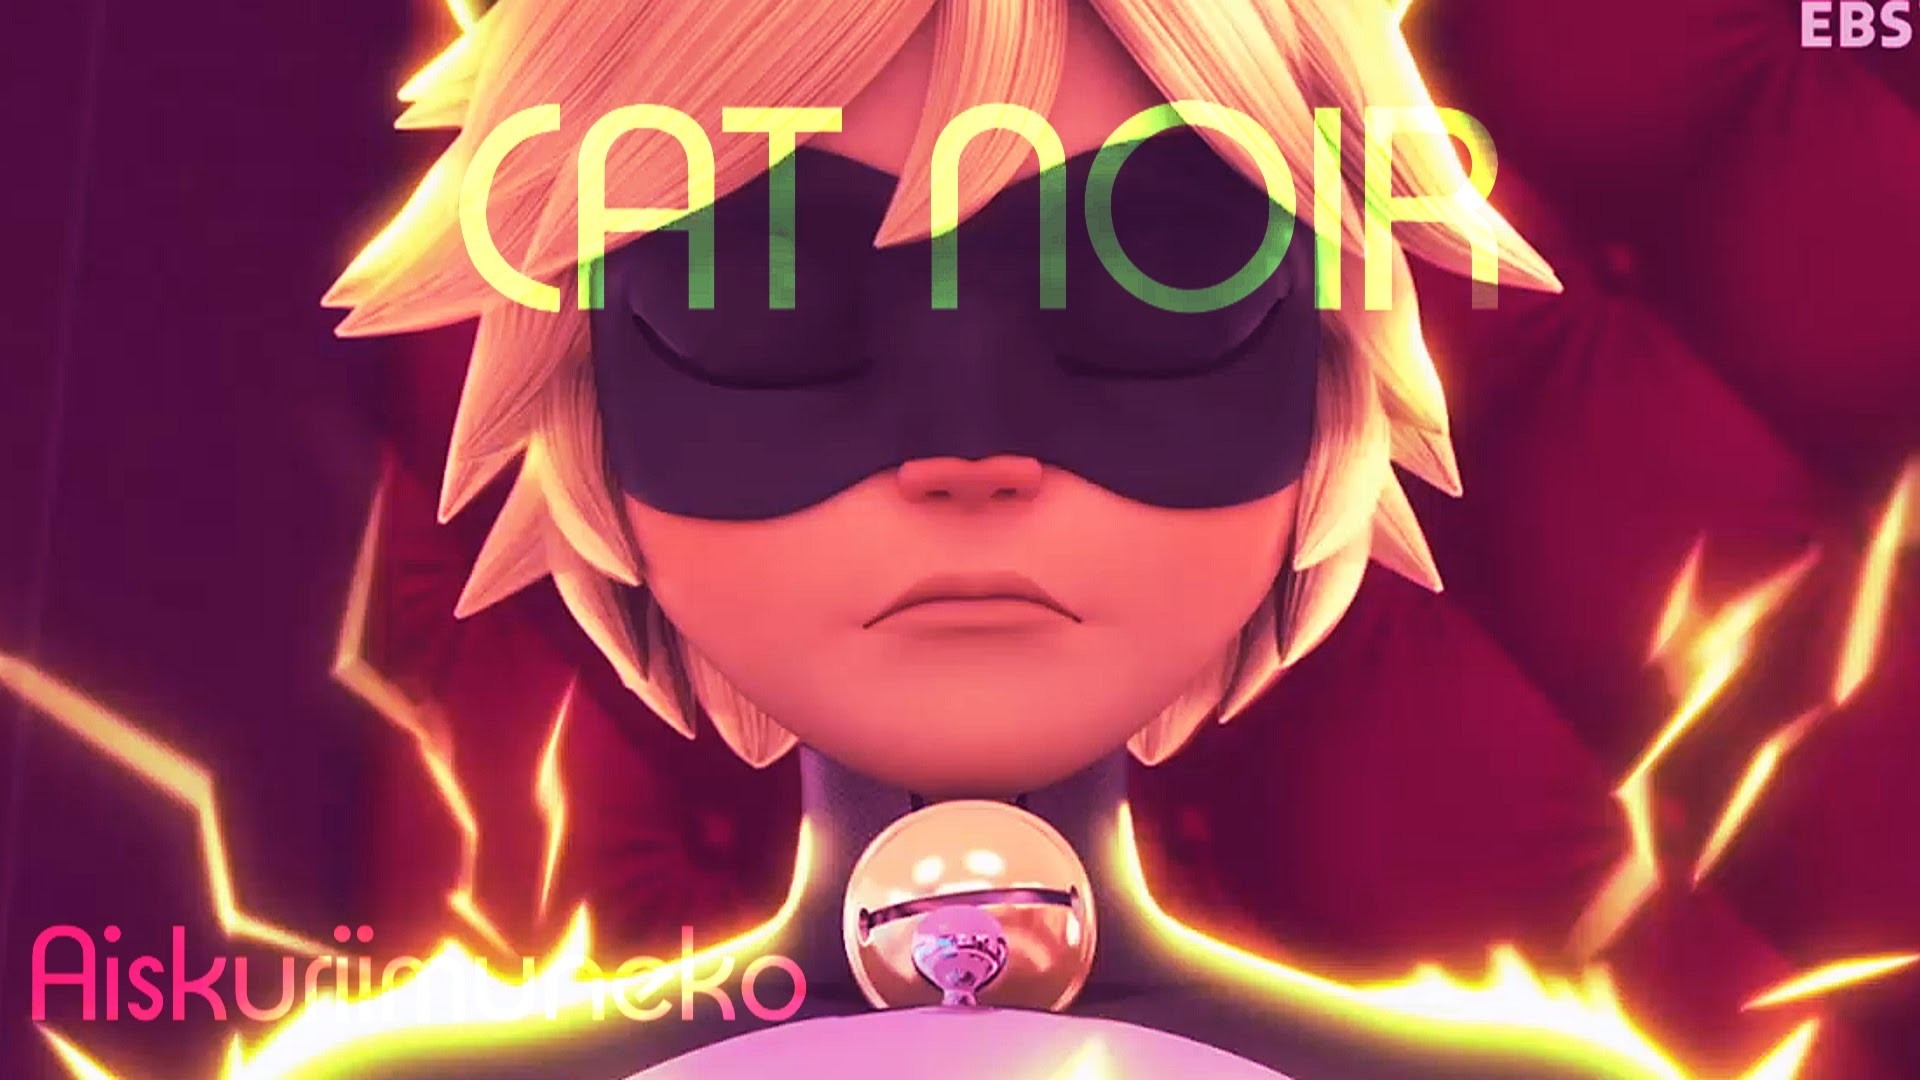 Ladybug and Chat Noir Wallpaper (75+ images)